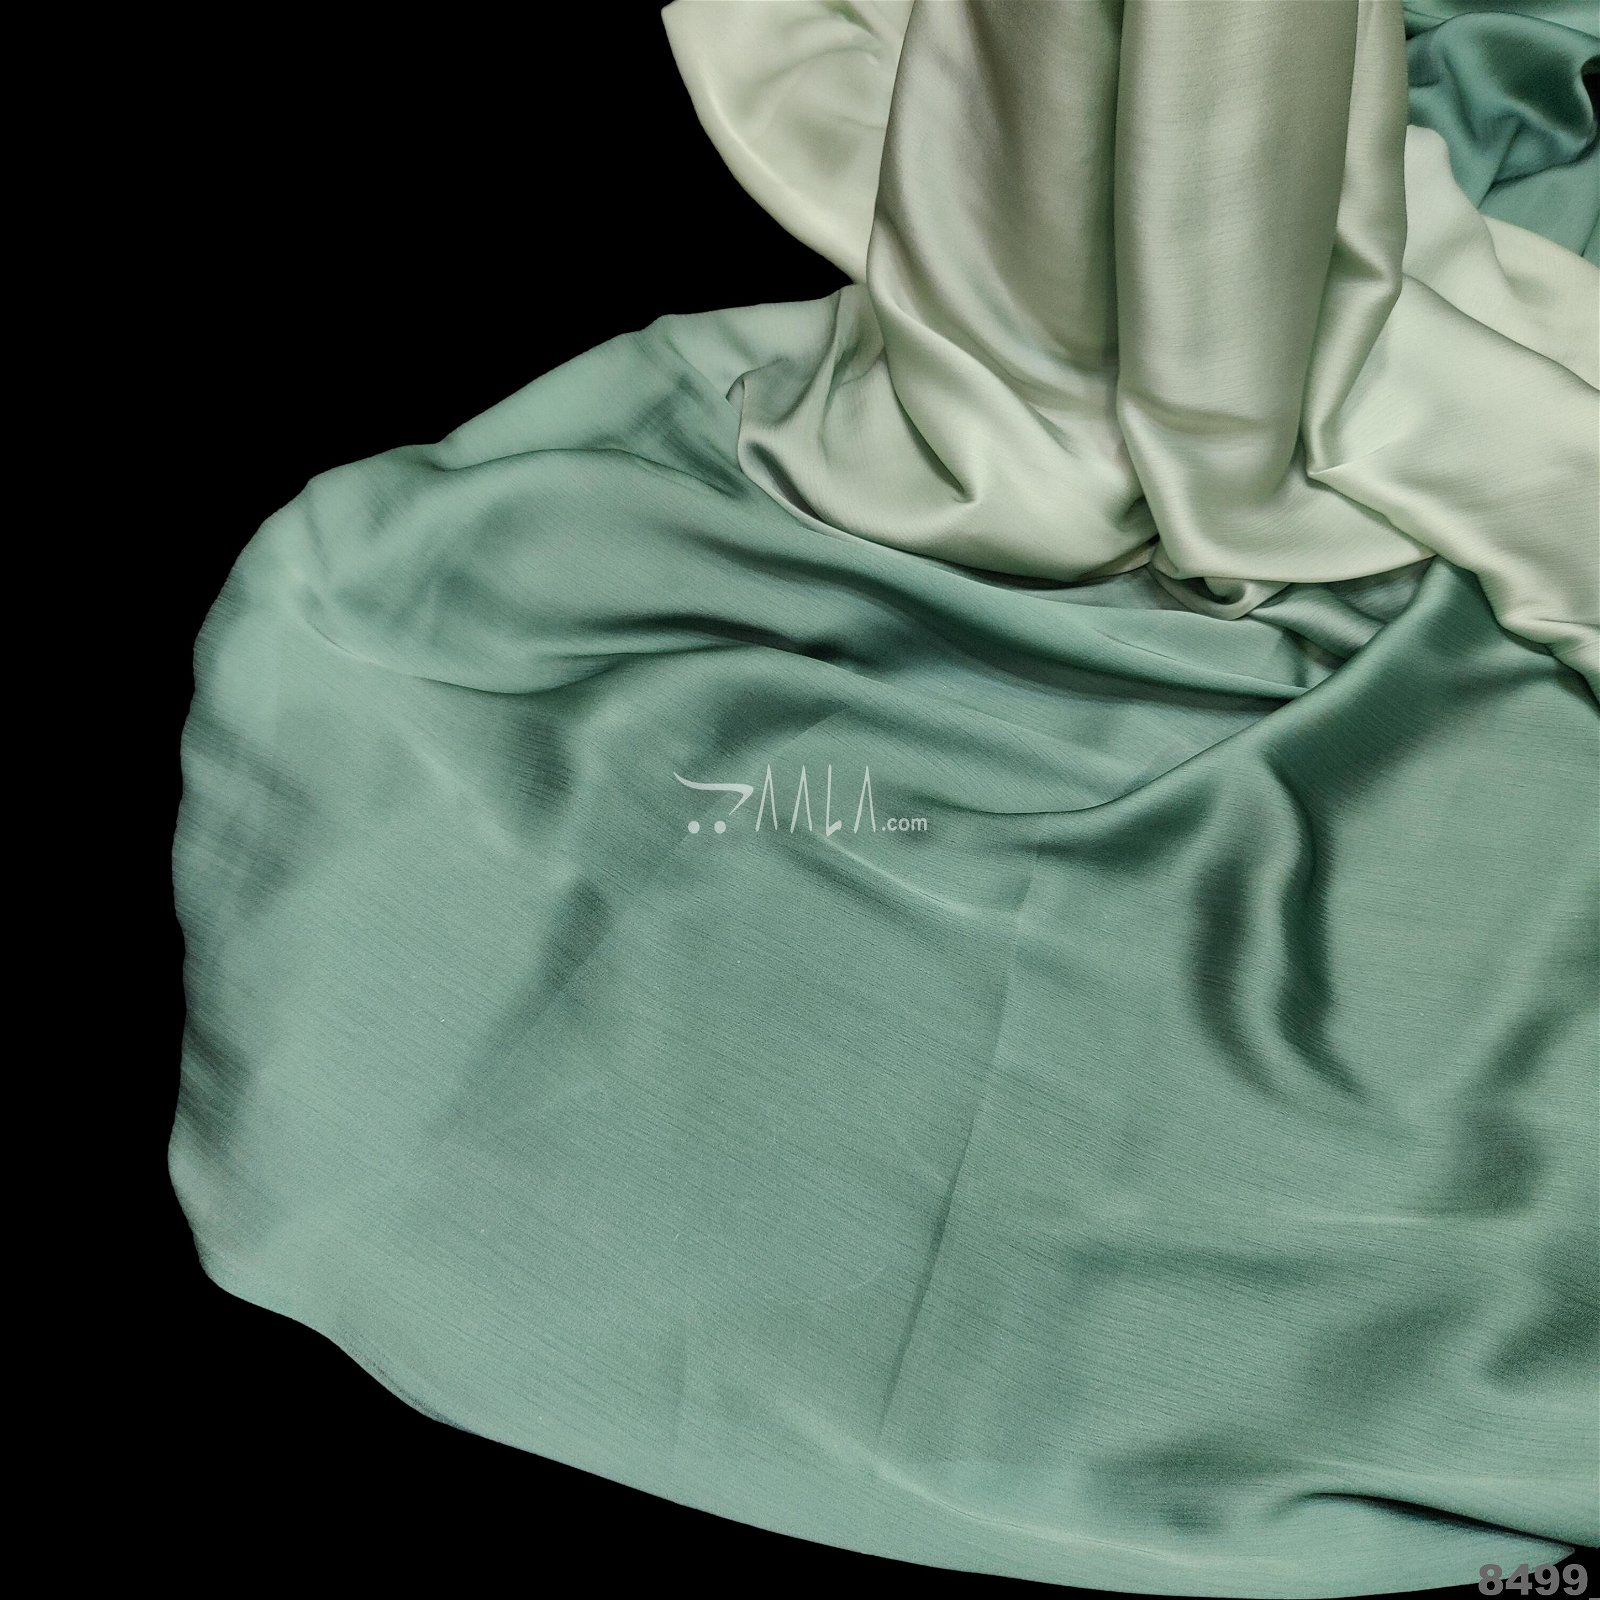 Shaded Satin-Chiffon Poly-ester 44-Inches ASSORTED Per-Metre #8499